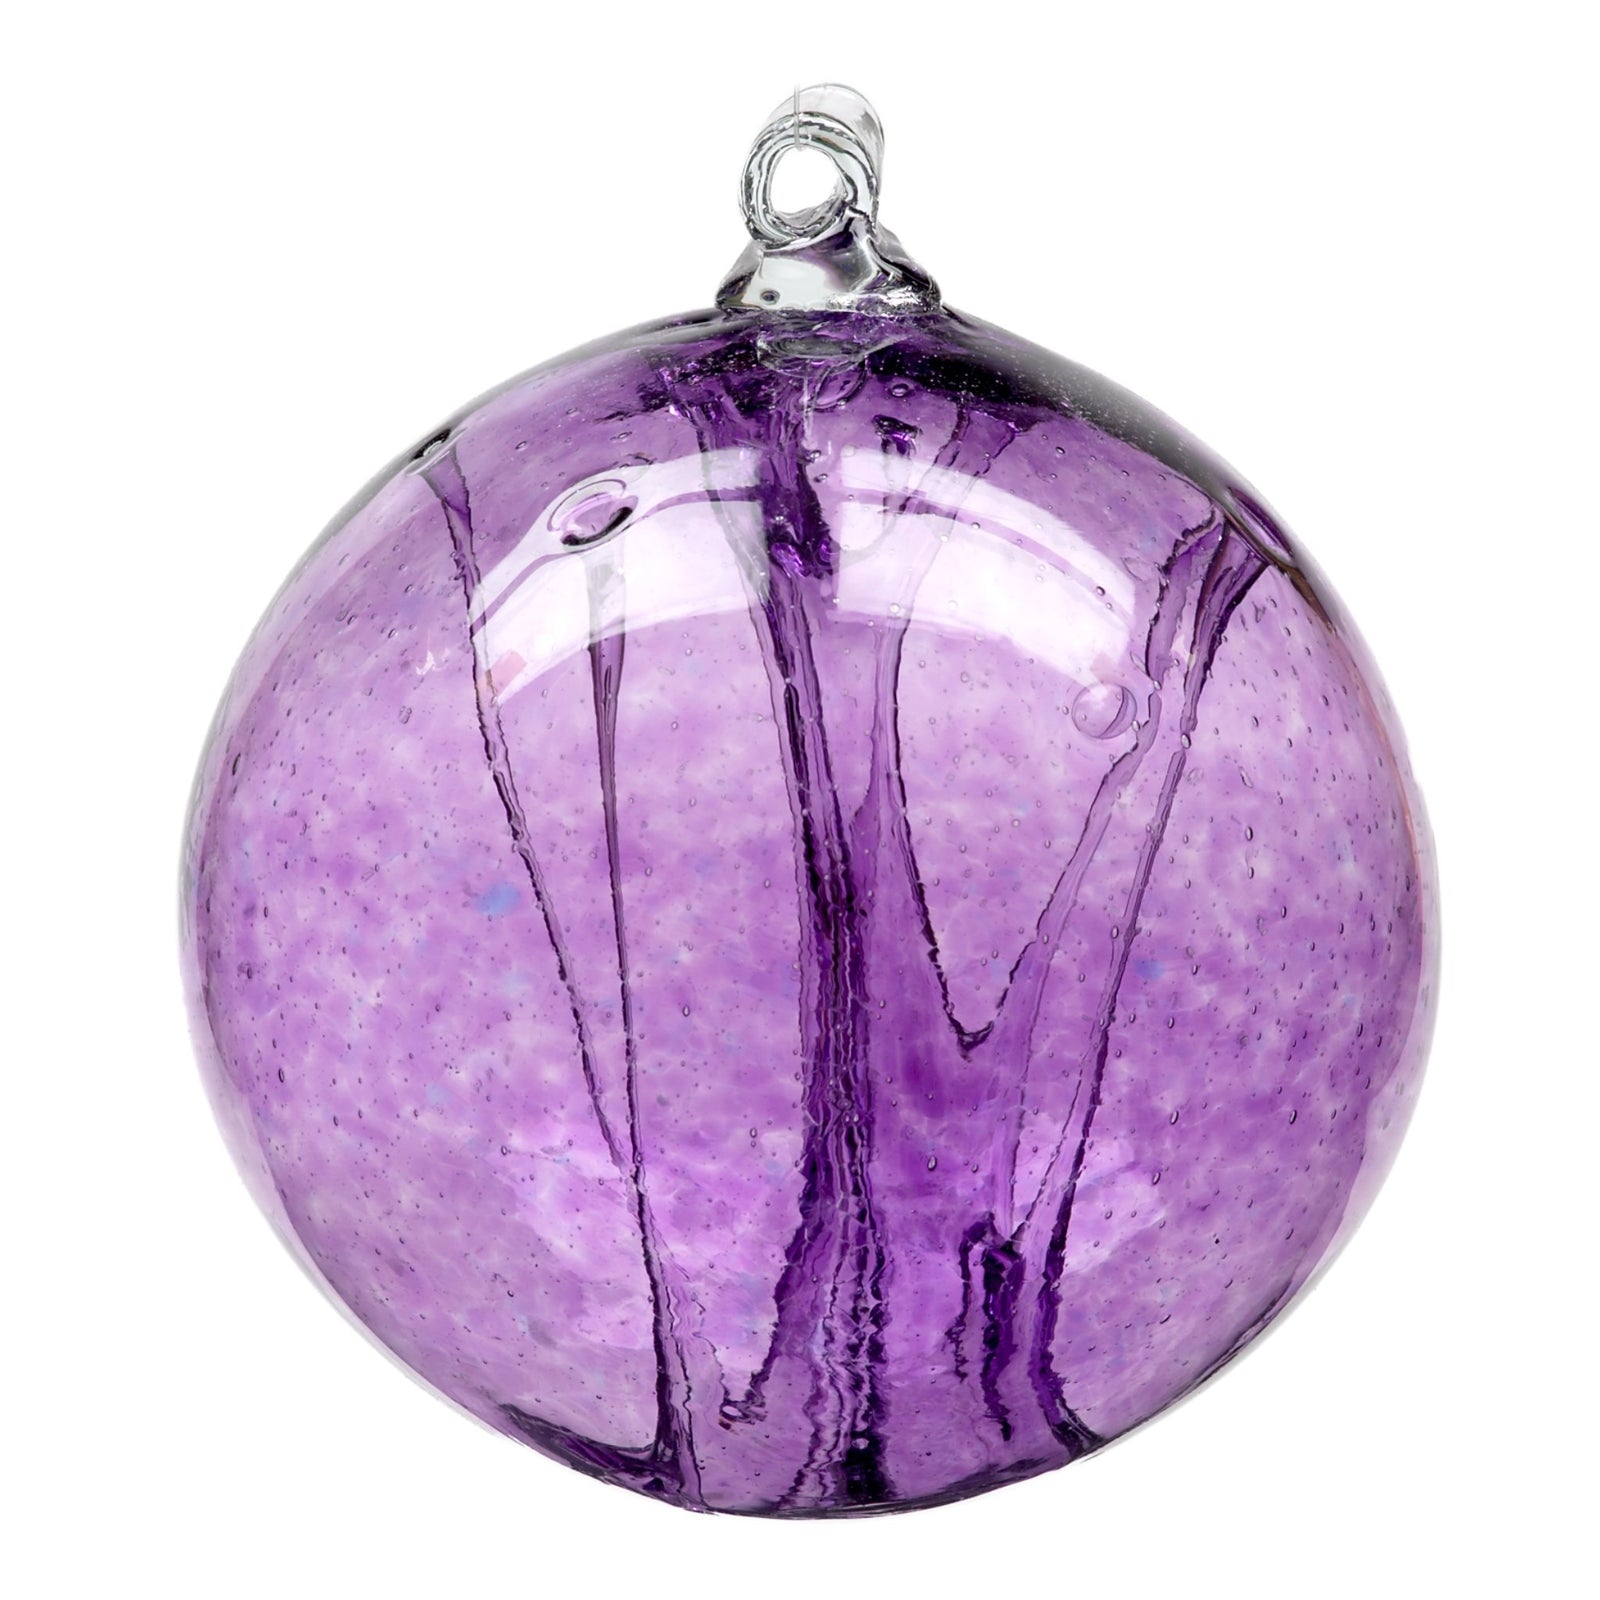 Olde English Witch Ball | Amethyst 6" Hand-blown Art Glass Ornament